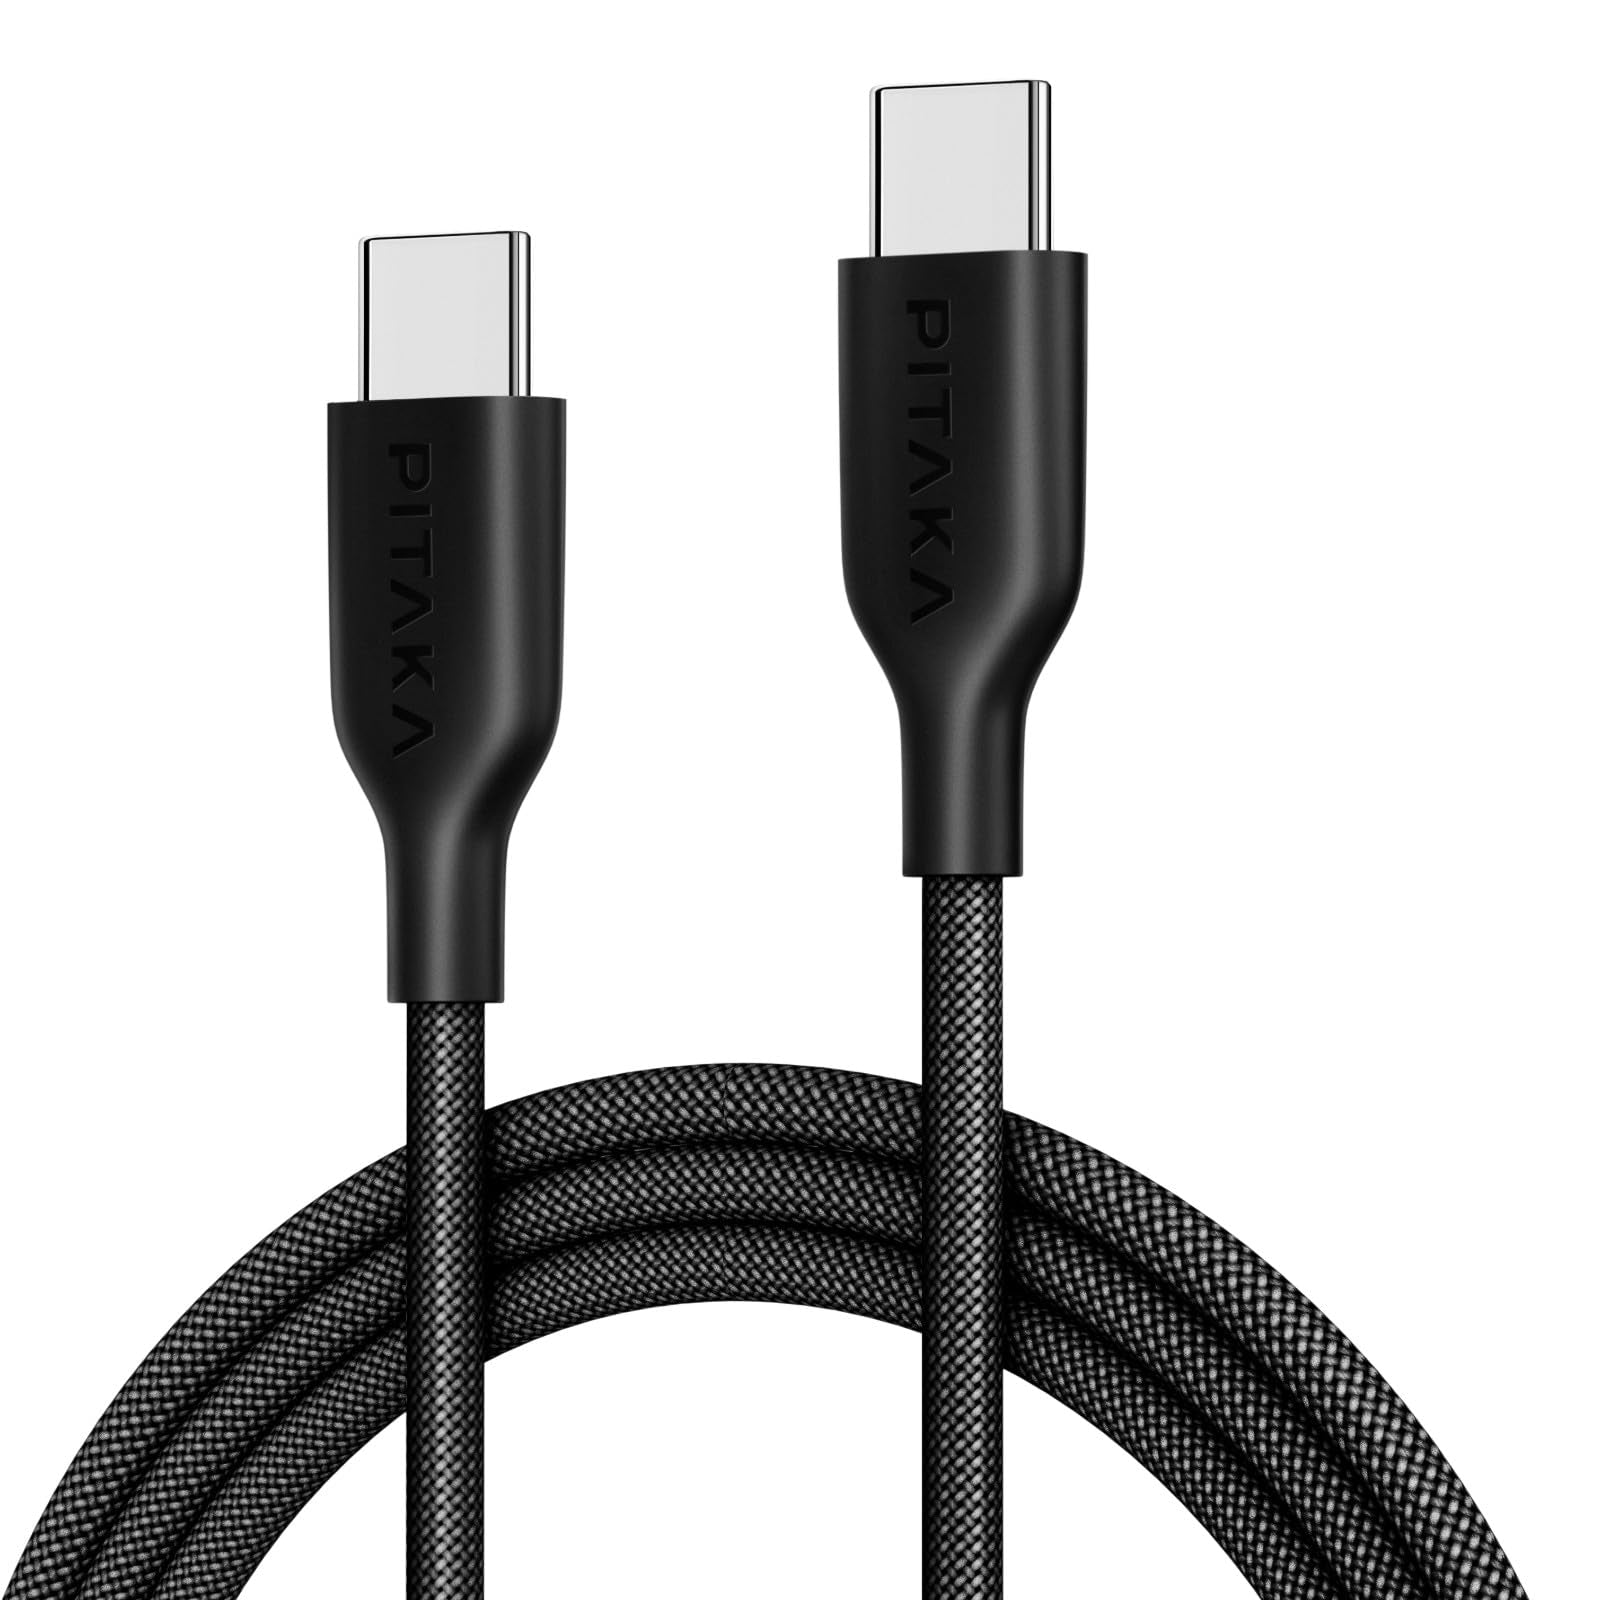 PITAKA USB C to USB C Cable, Nylon Braided USB C Charger Cable, 3.94ft - iGadget Store